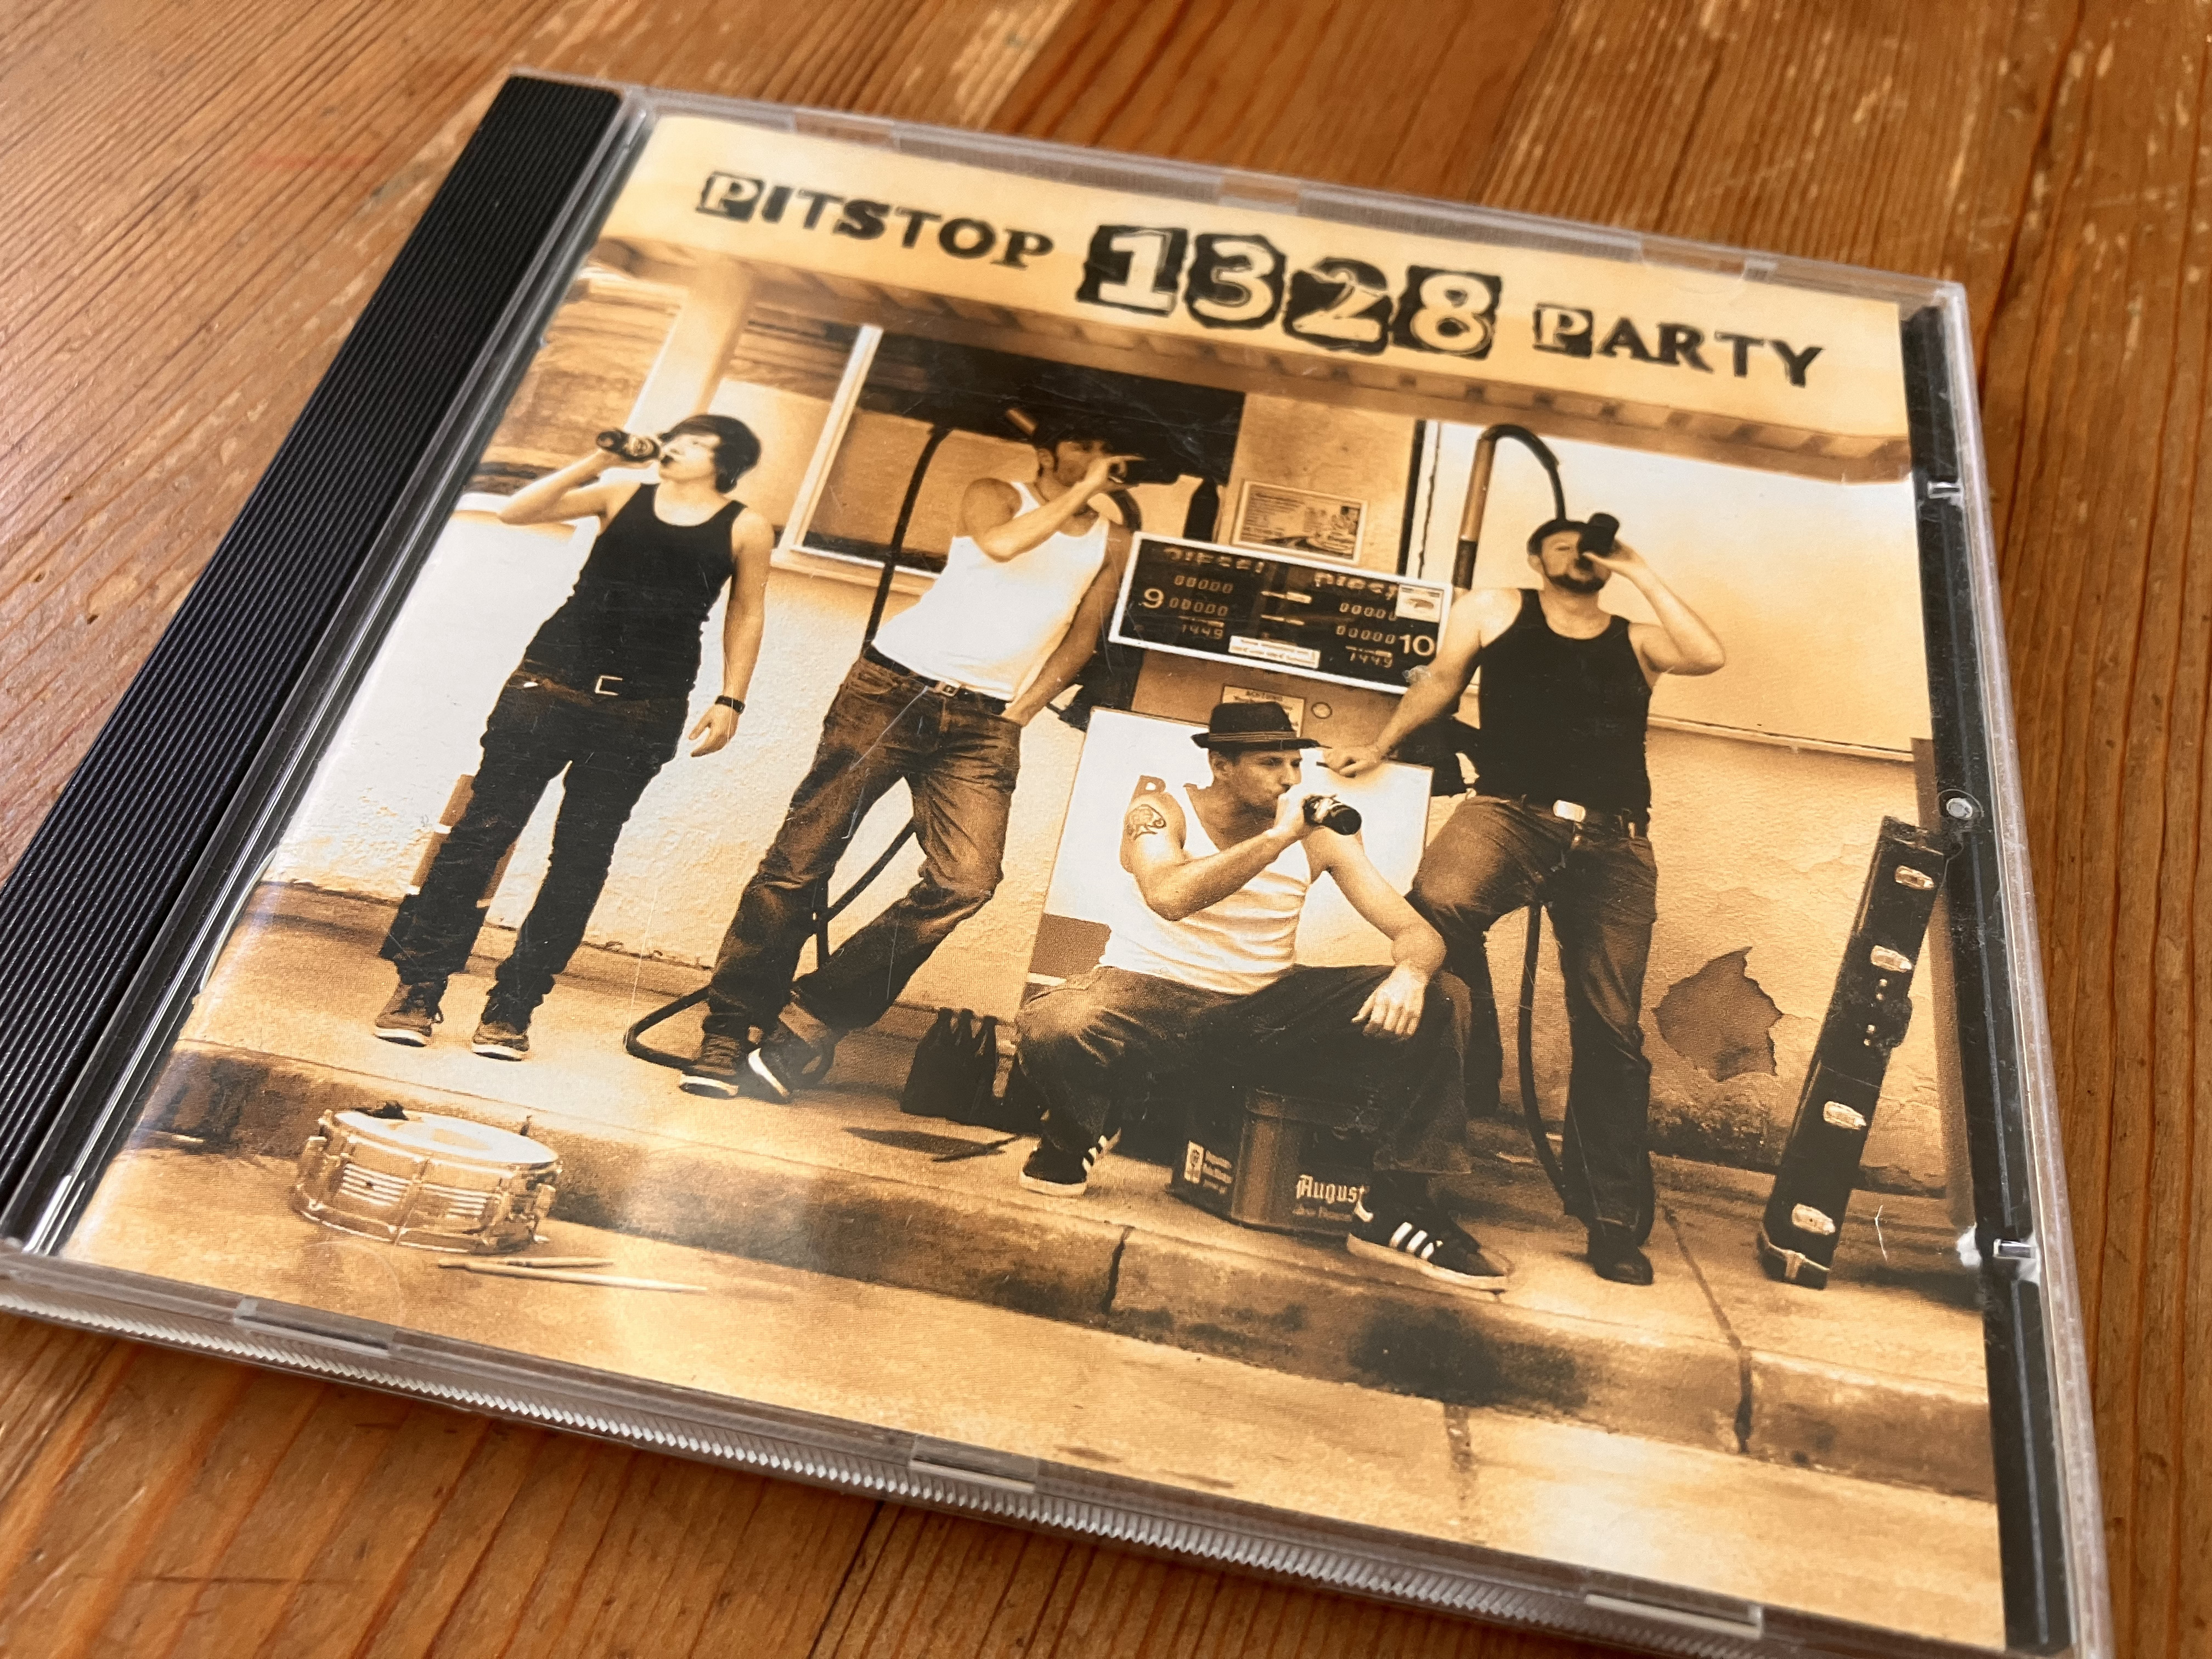 1328 - Pitstop Party - CD